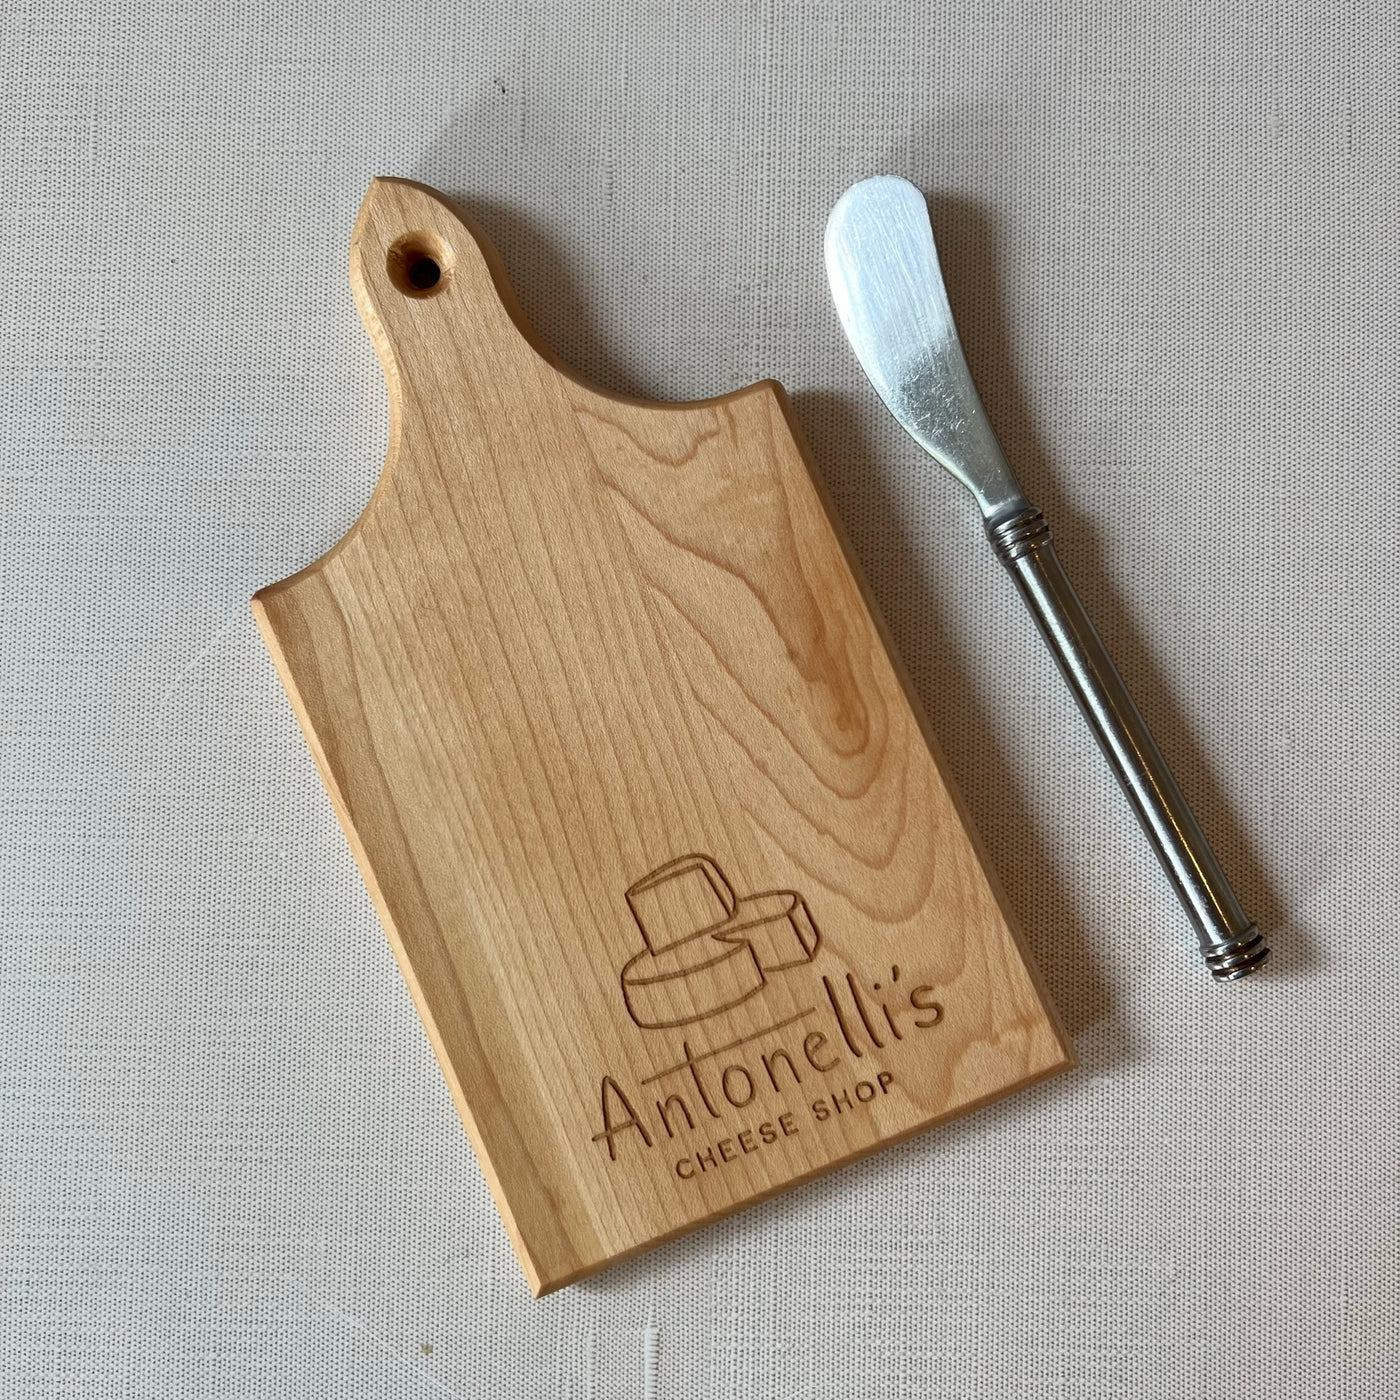 Small cutting board with stainless steal spreader